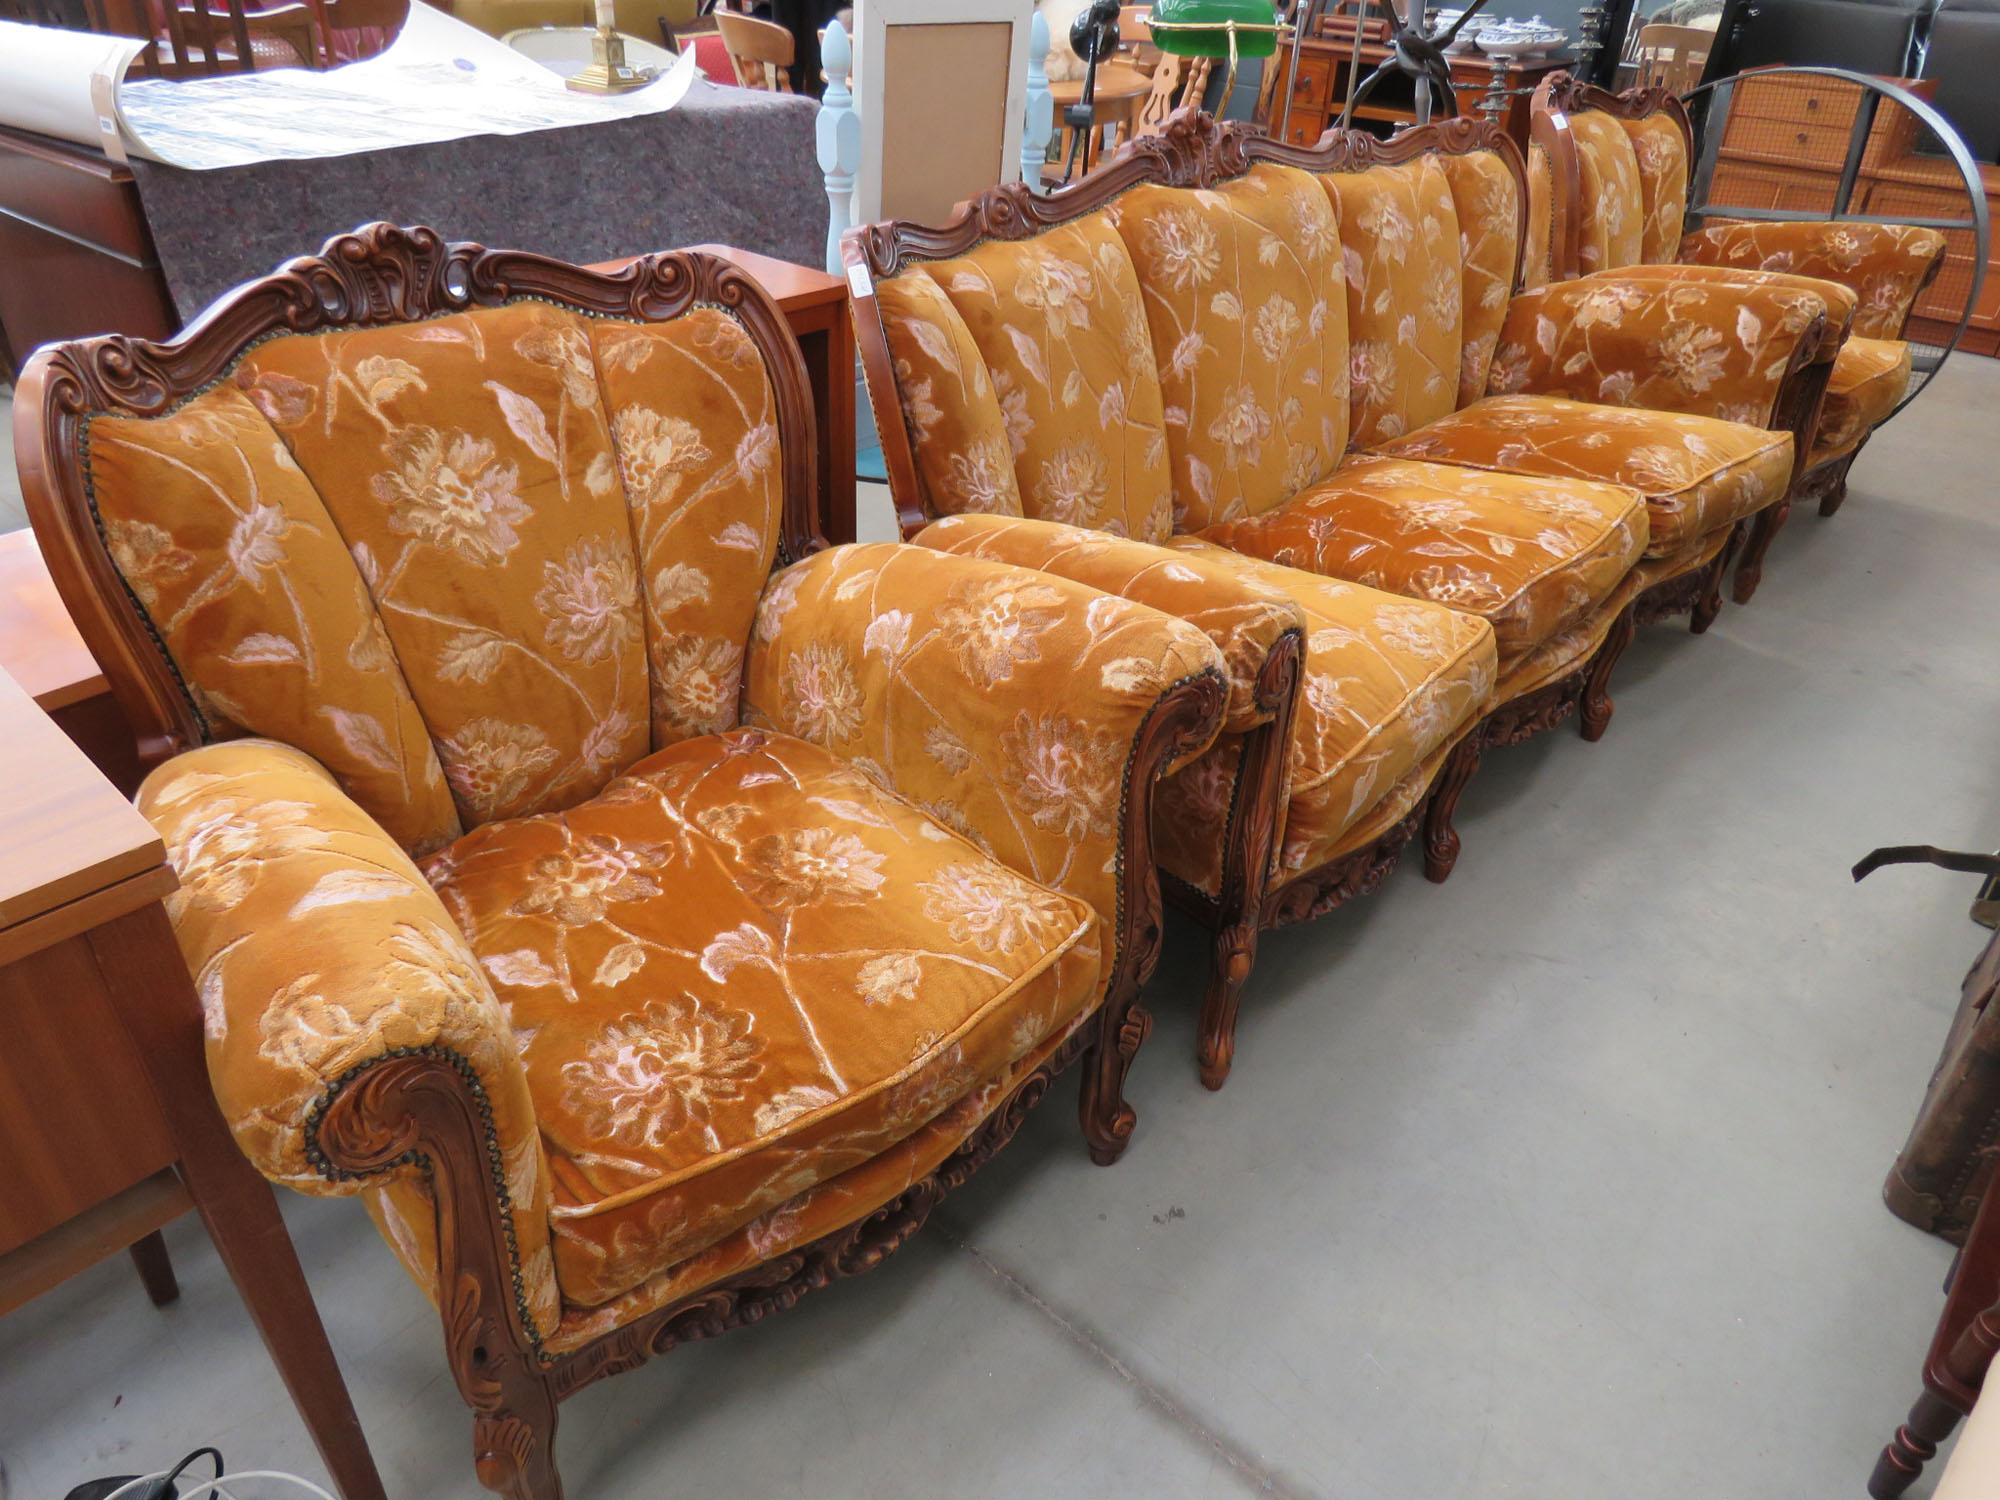 Carved 3 seater sofa with floral patterned brown cushions and pair of matching armchairs